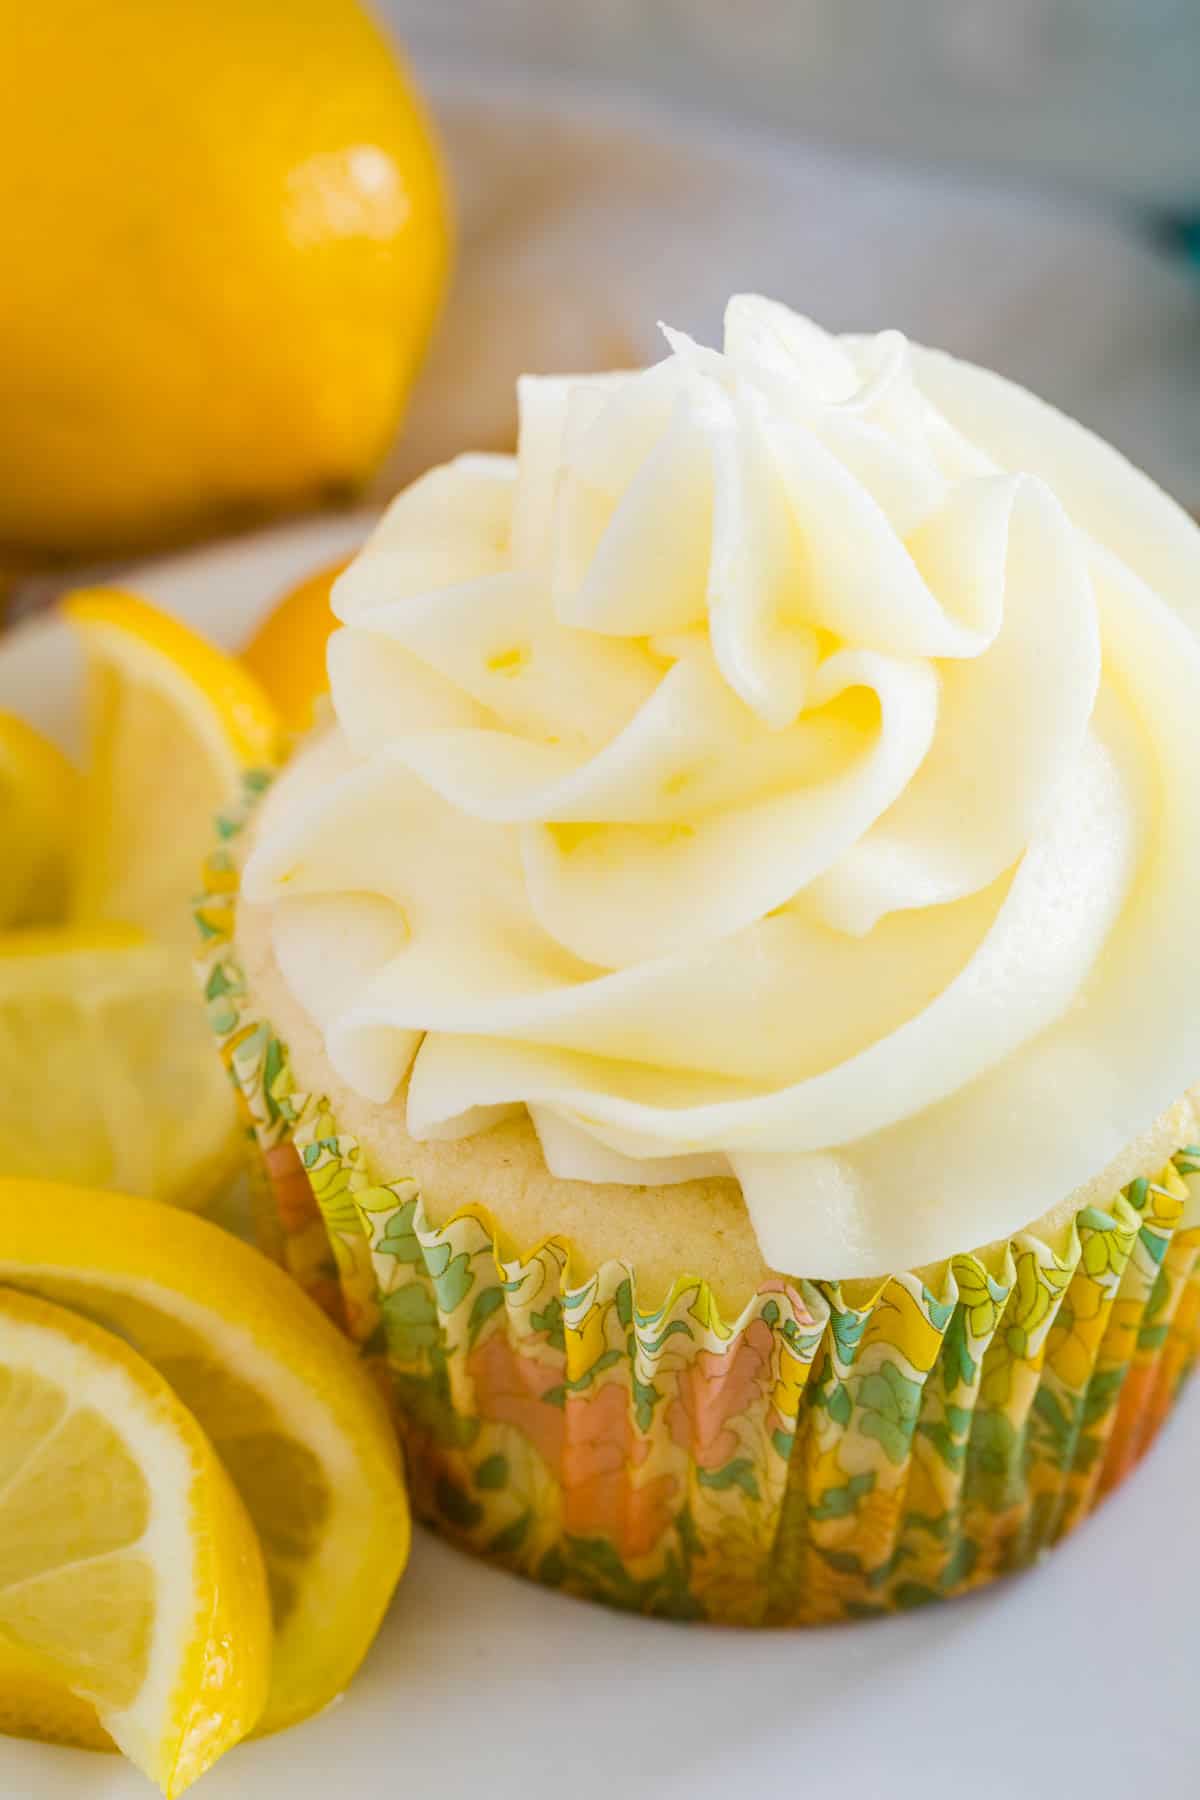 A frosted gluten-free lemon cupcake on a white plate next to lemon slices.